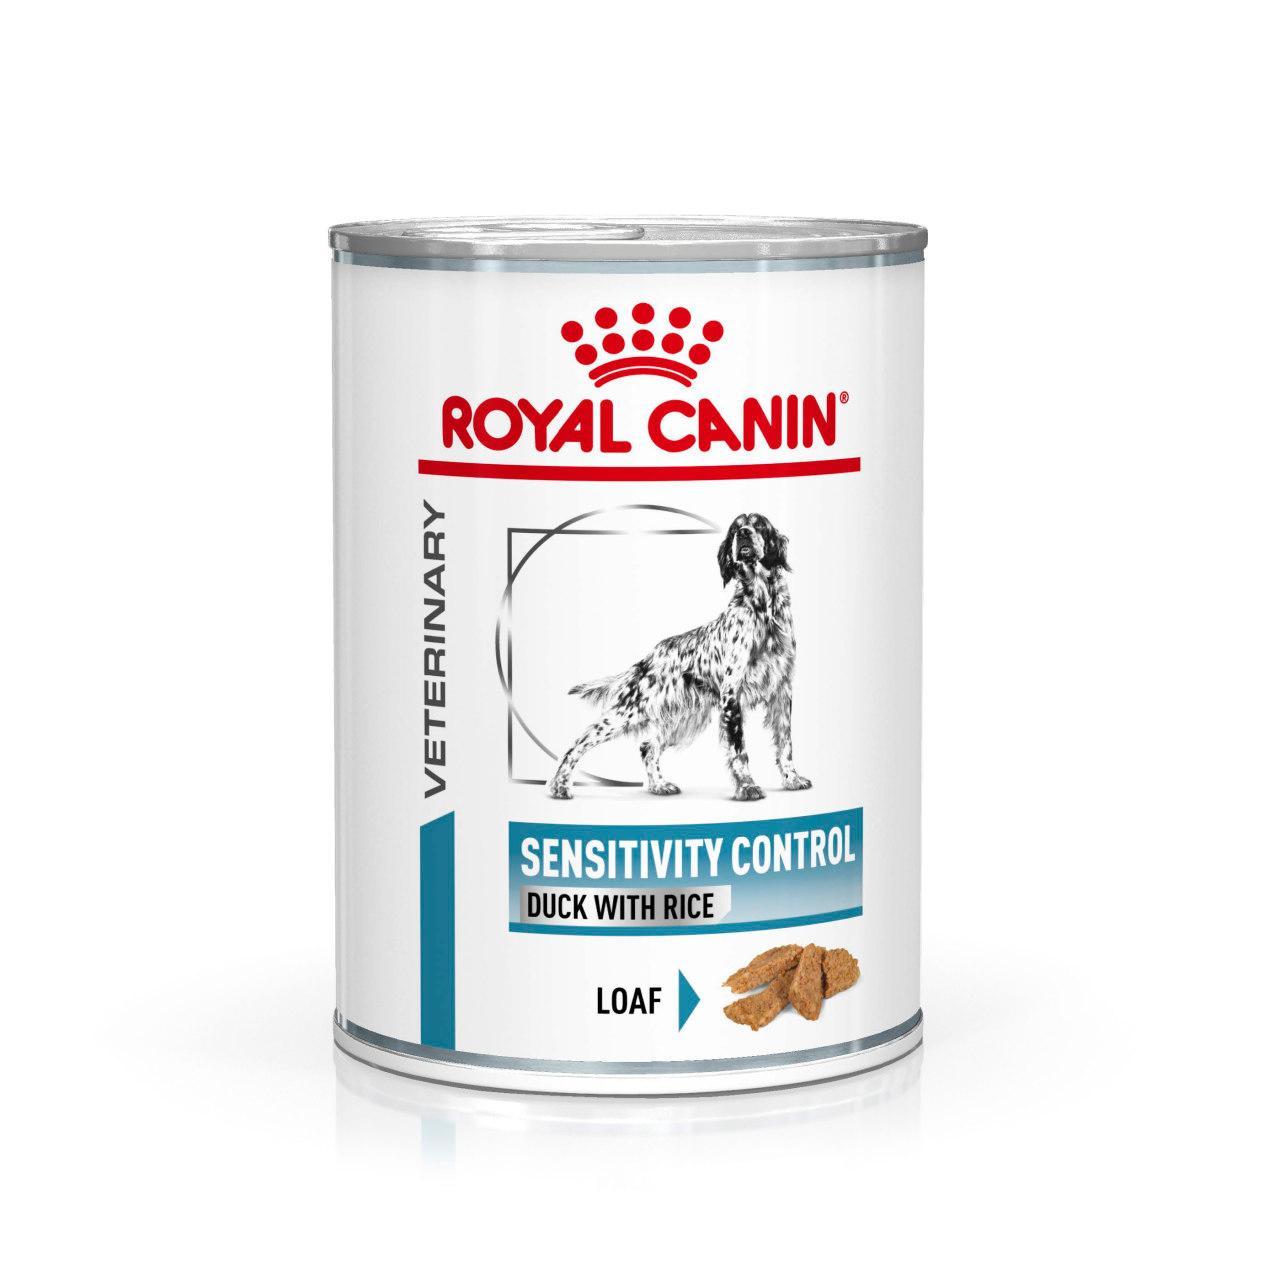 An image of Royal Canin Canine Sensitivity Control with Duck